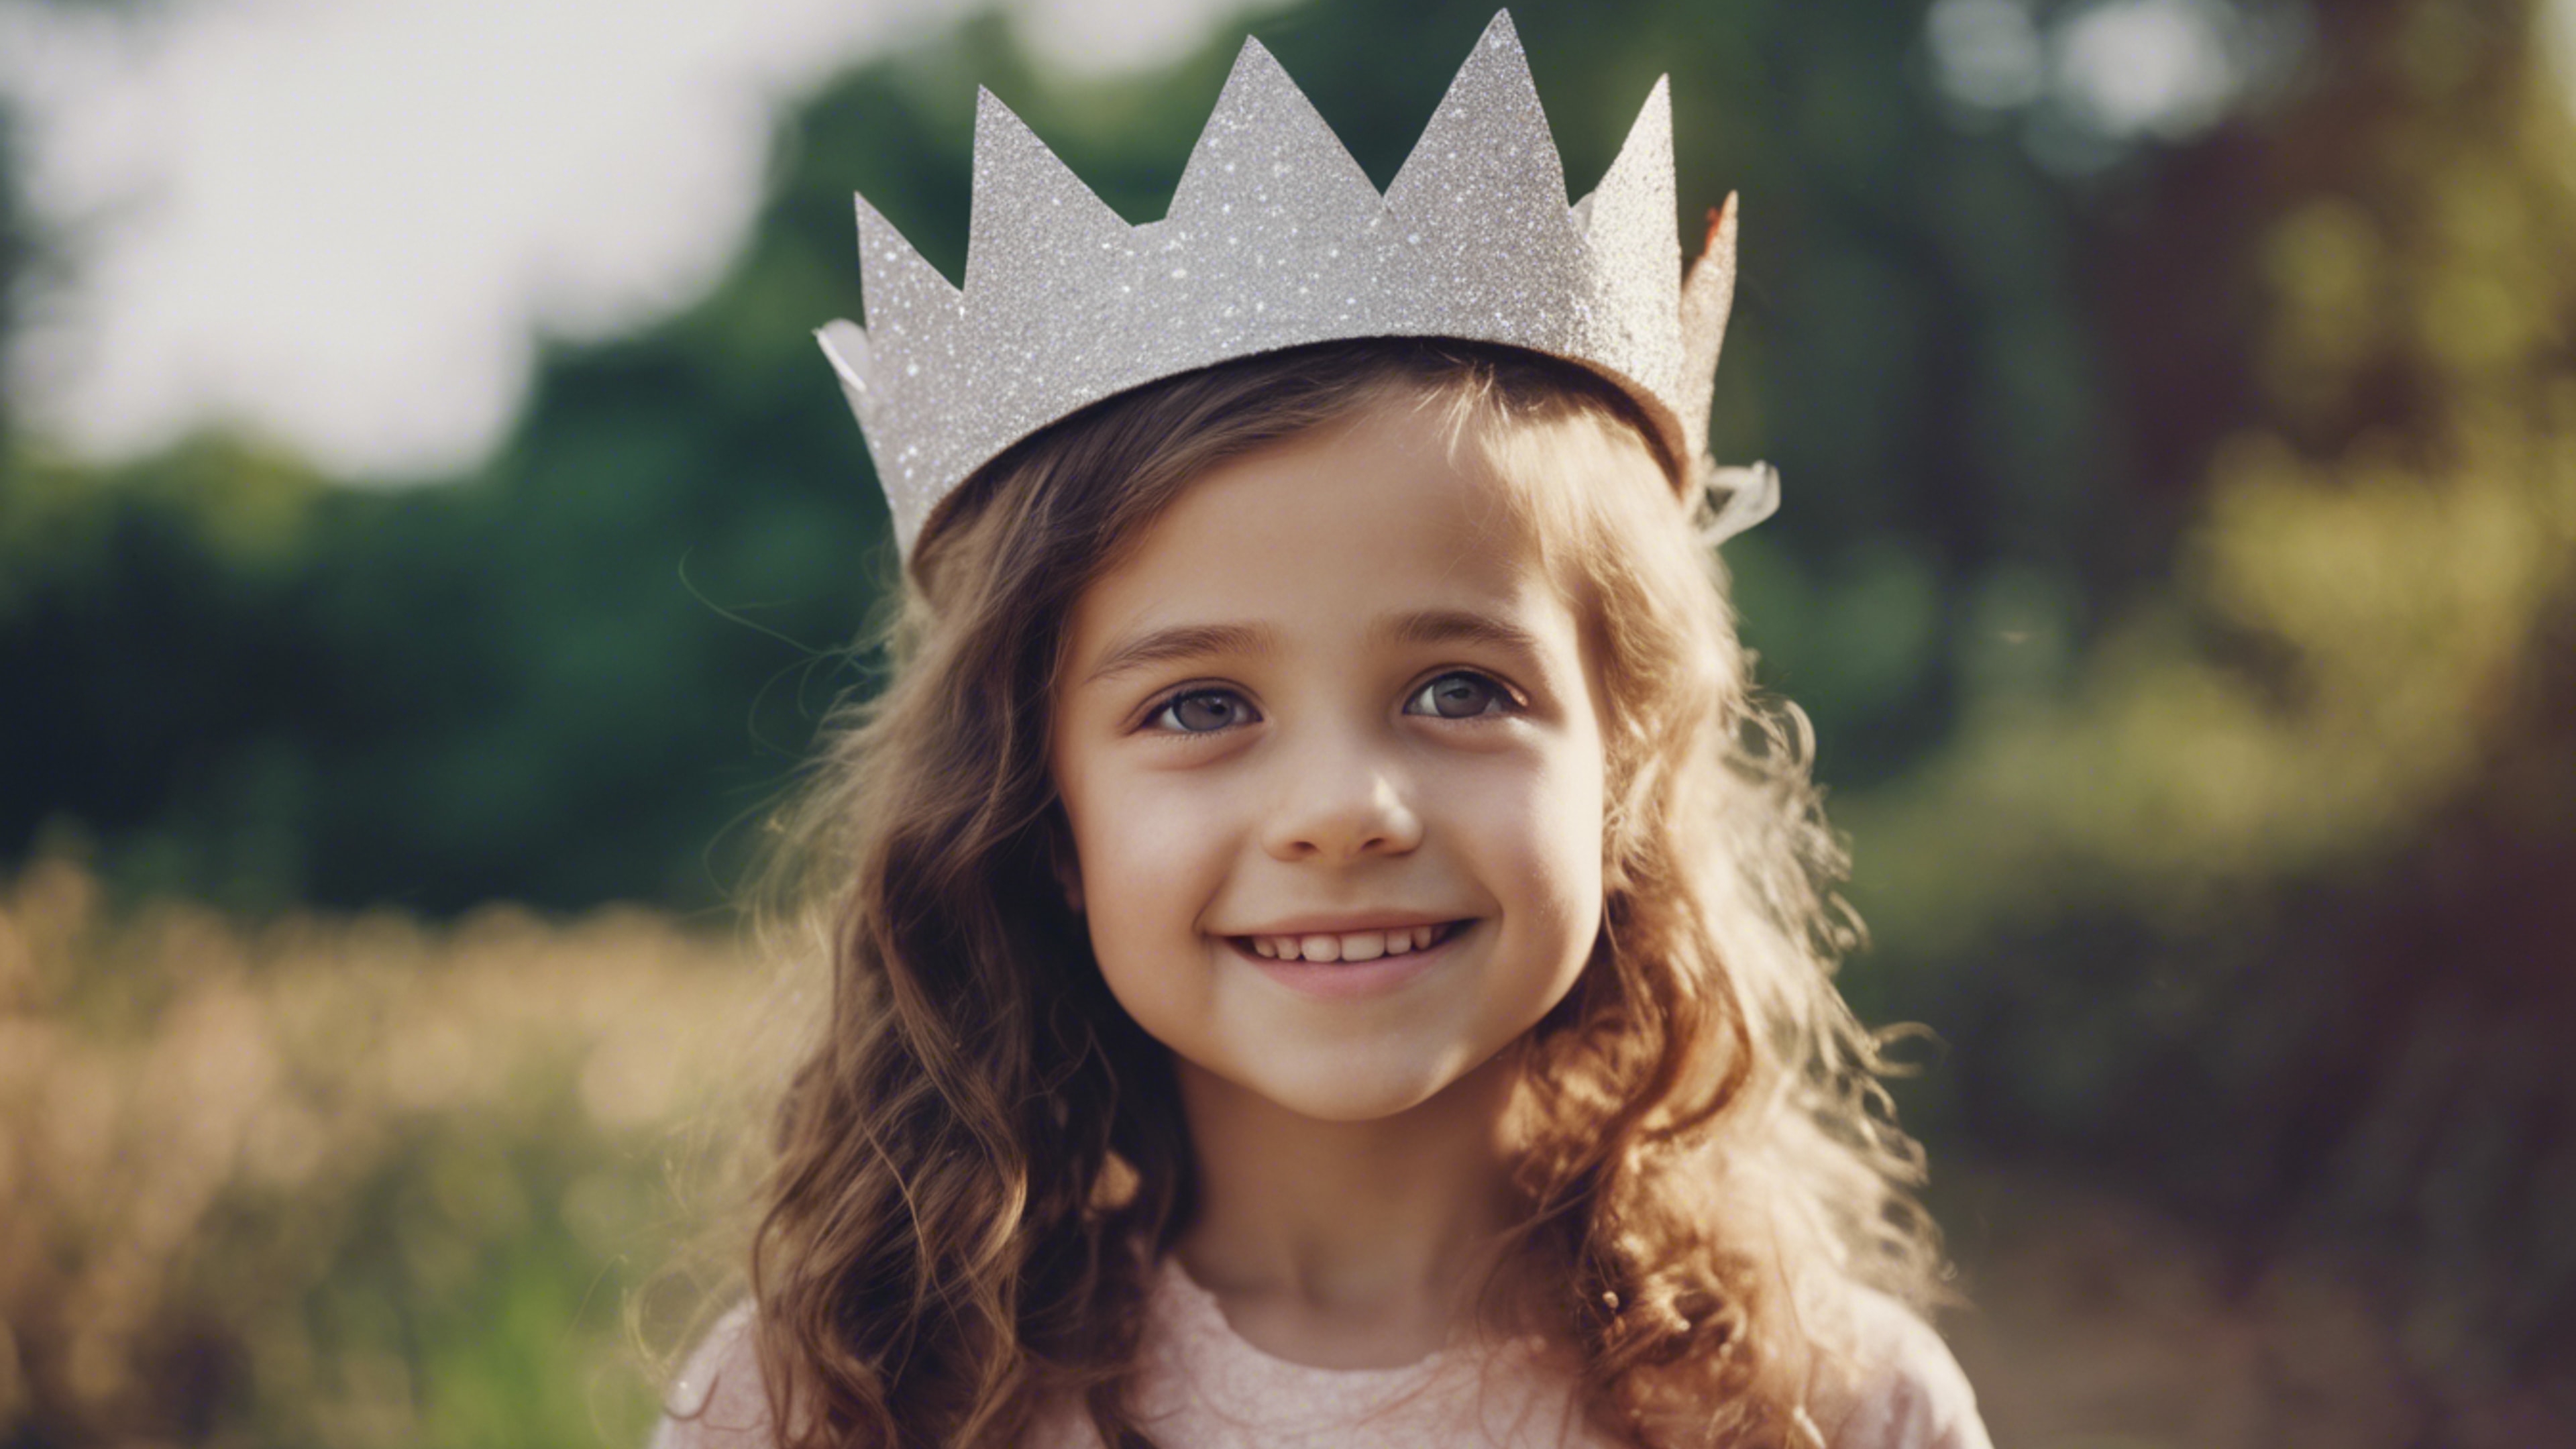 A young girl with sparkling eyes, happily wearing a homemade paper crown. Tapéta[aa9d8265bf9b488b9728]